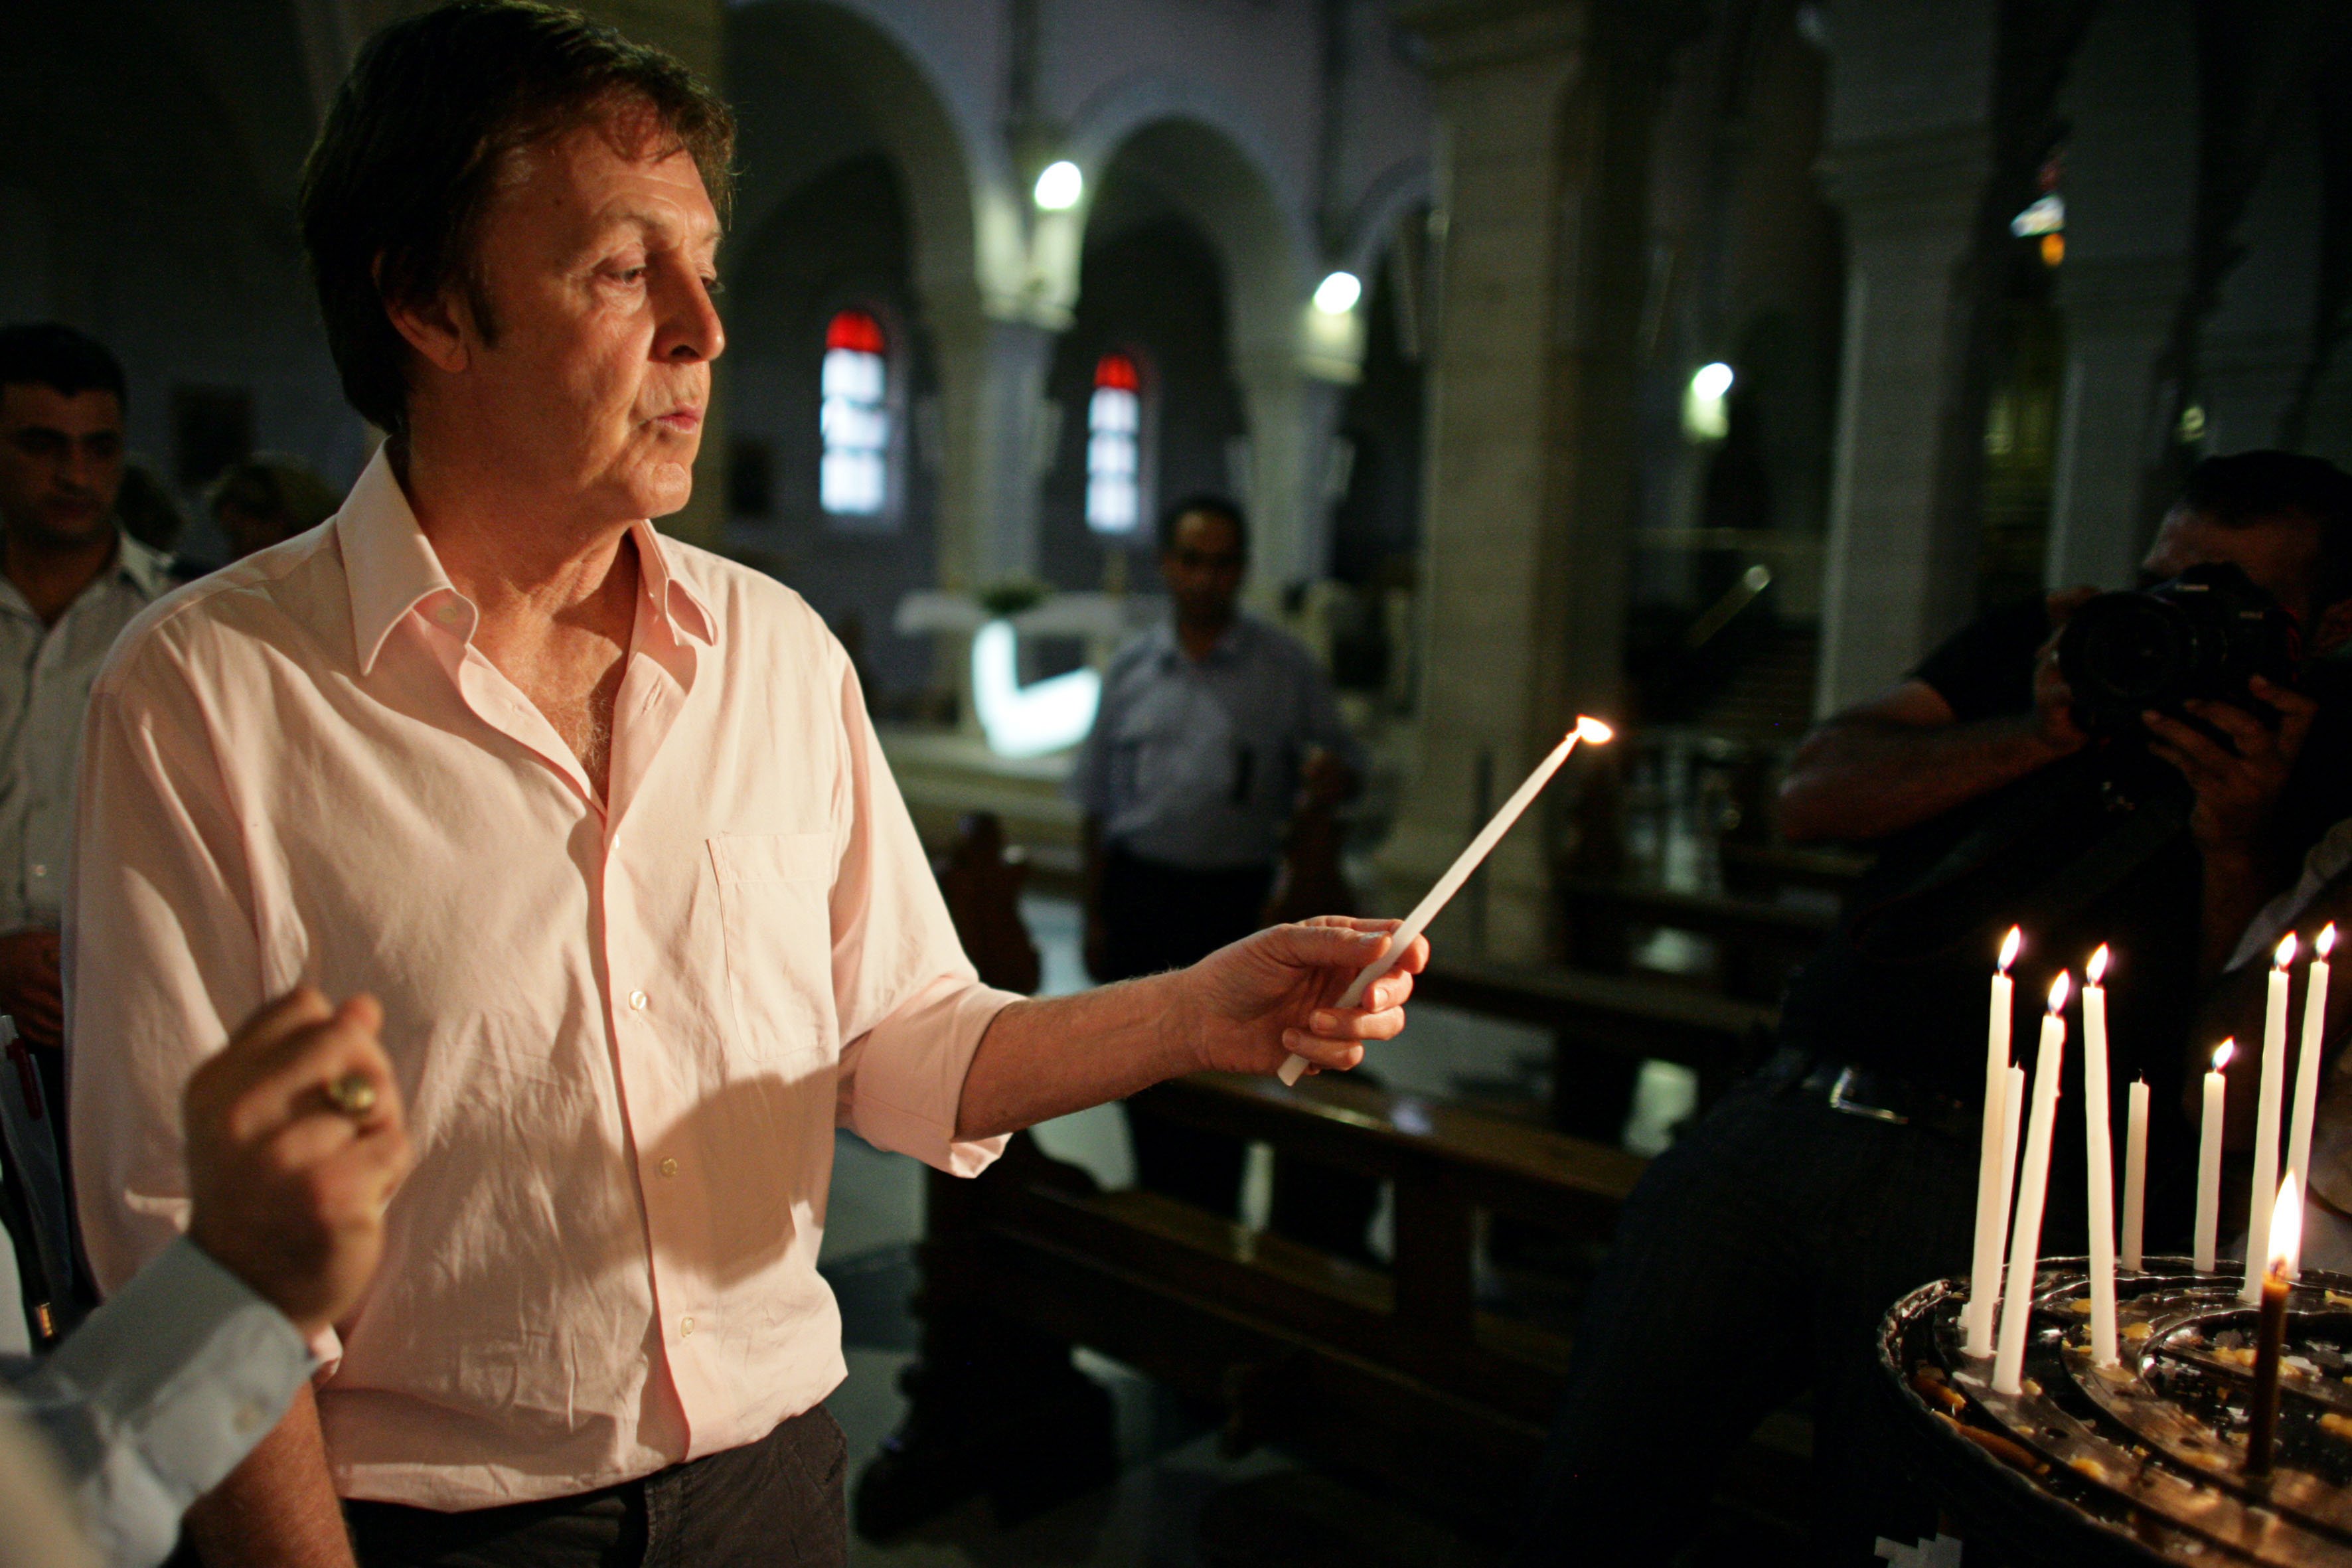 Paul McCartney visits The Church of the Nativity ahead of his Friendship First concert in Tel Aviv, Israel